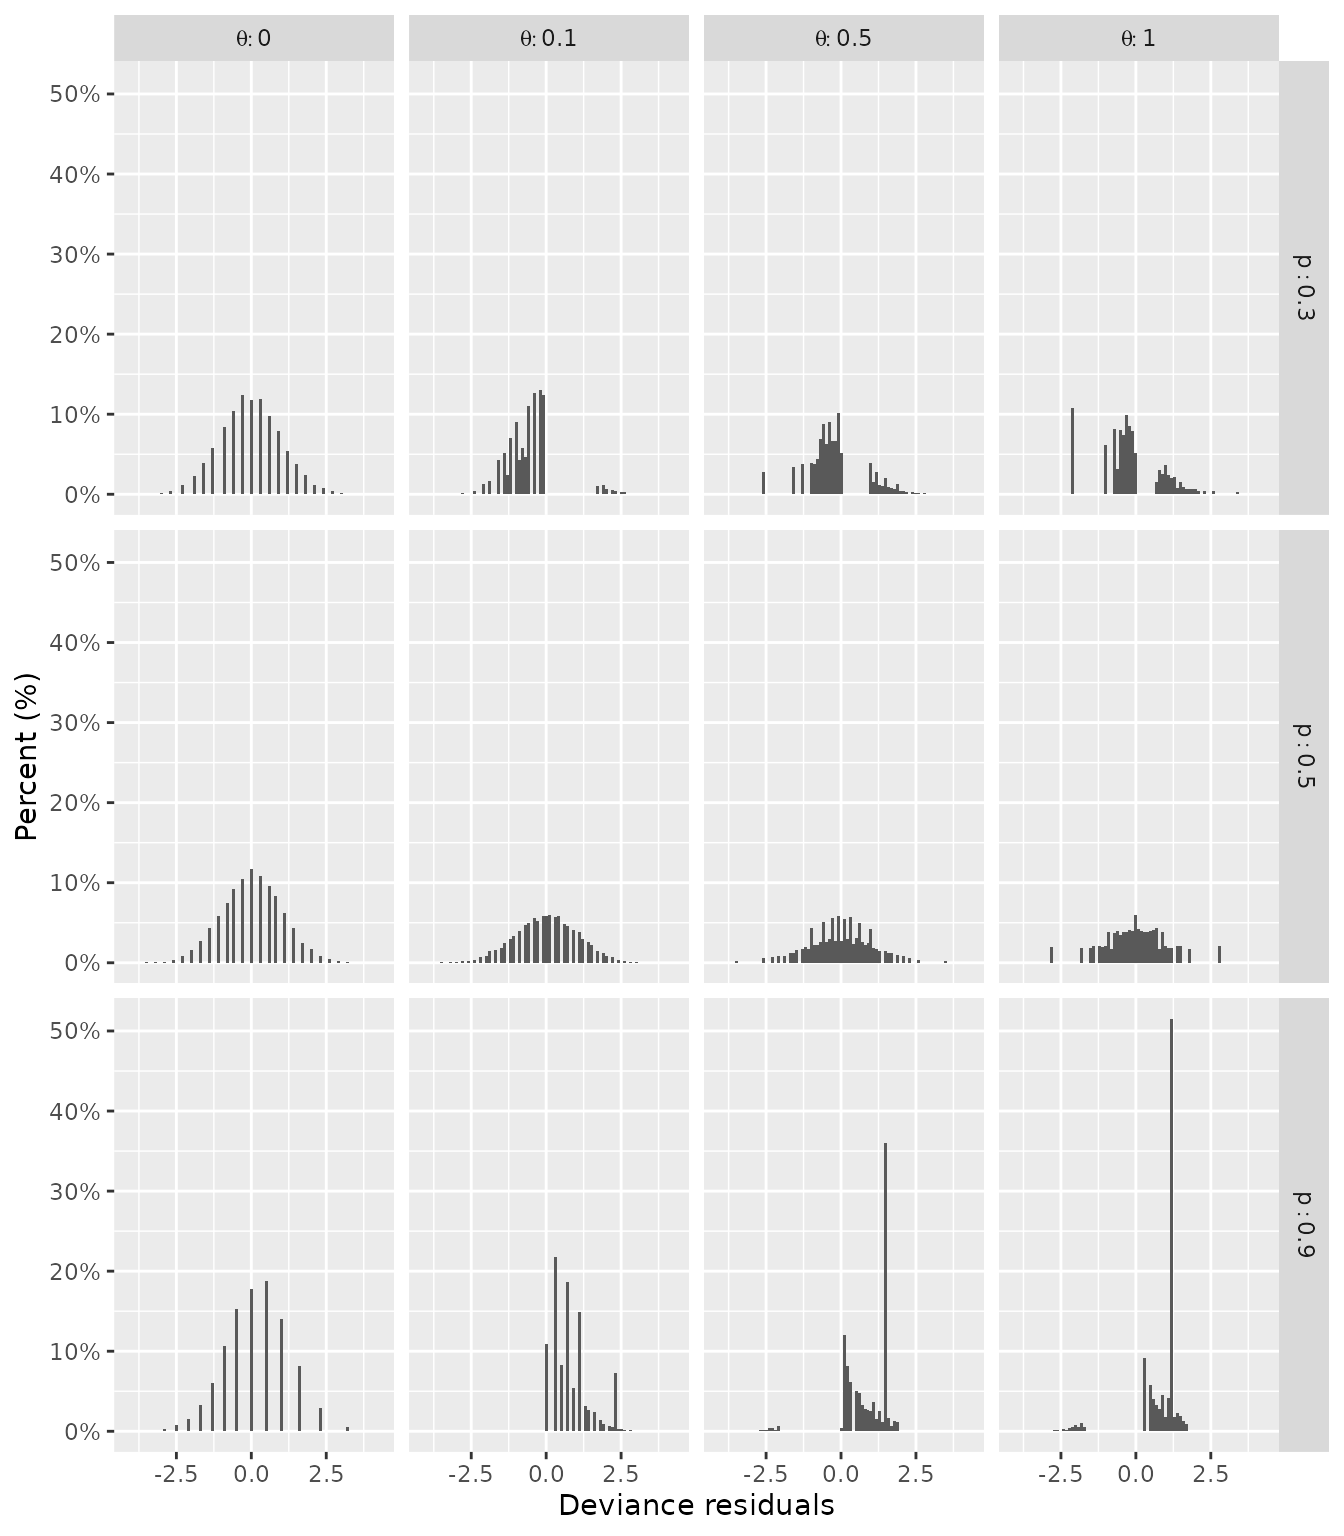 Fig. 4: Histograms of deviance residuals for 10,000 beta-binomial data points simulated with $n = 50$, $p = \{0.3, 0.5, 0.9 \}$, and $\theta = \{0.0, 0.1, 0.5, 1.0 \}$. The percentages within each panel (i.e., each combination of $p$ and $\theta$) sum to 100%.